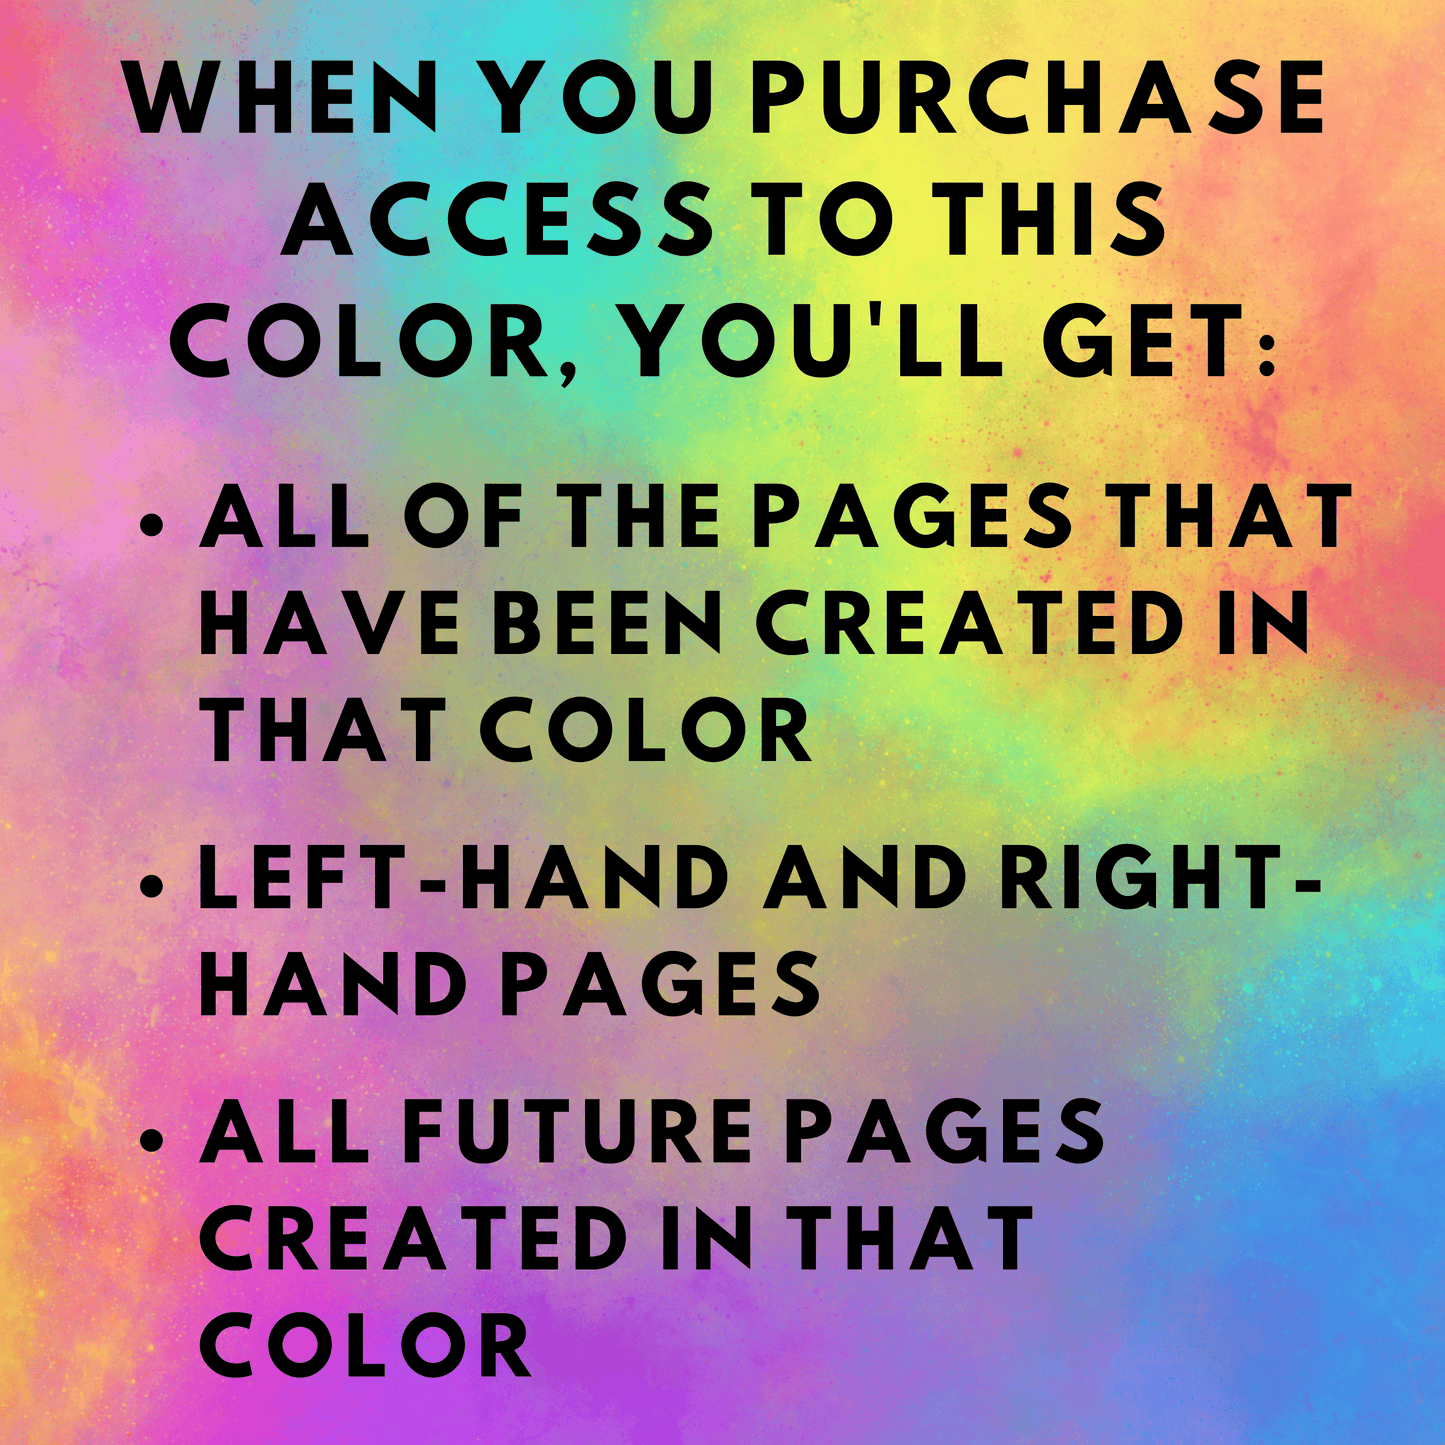 Color Sale: All the Fuchsia Pages